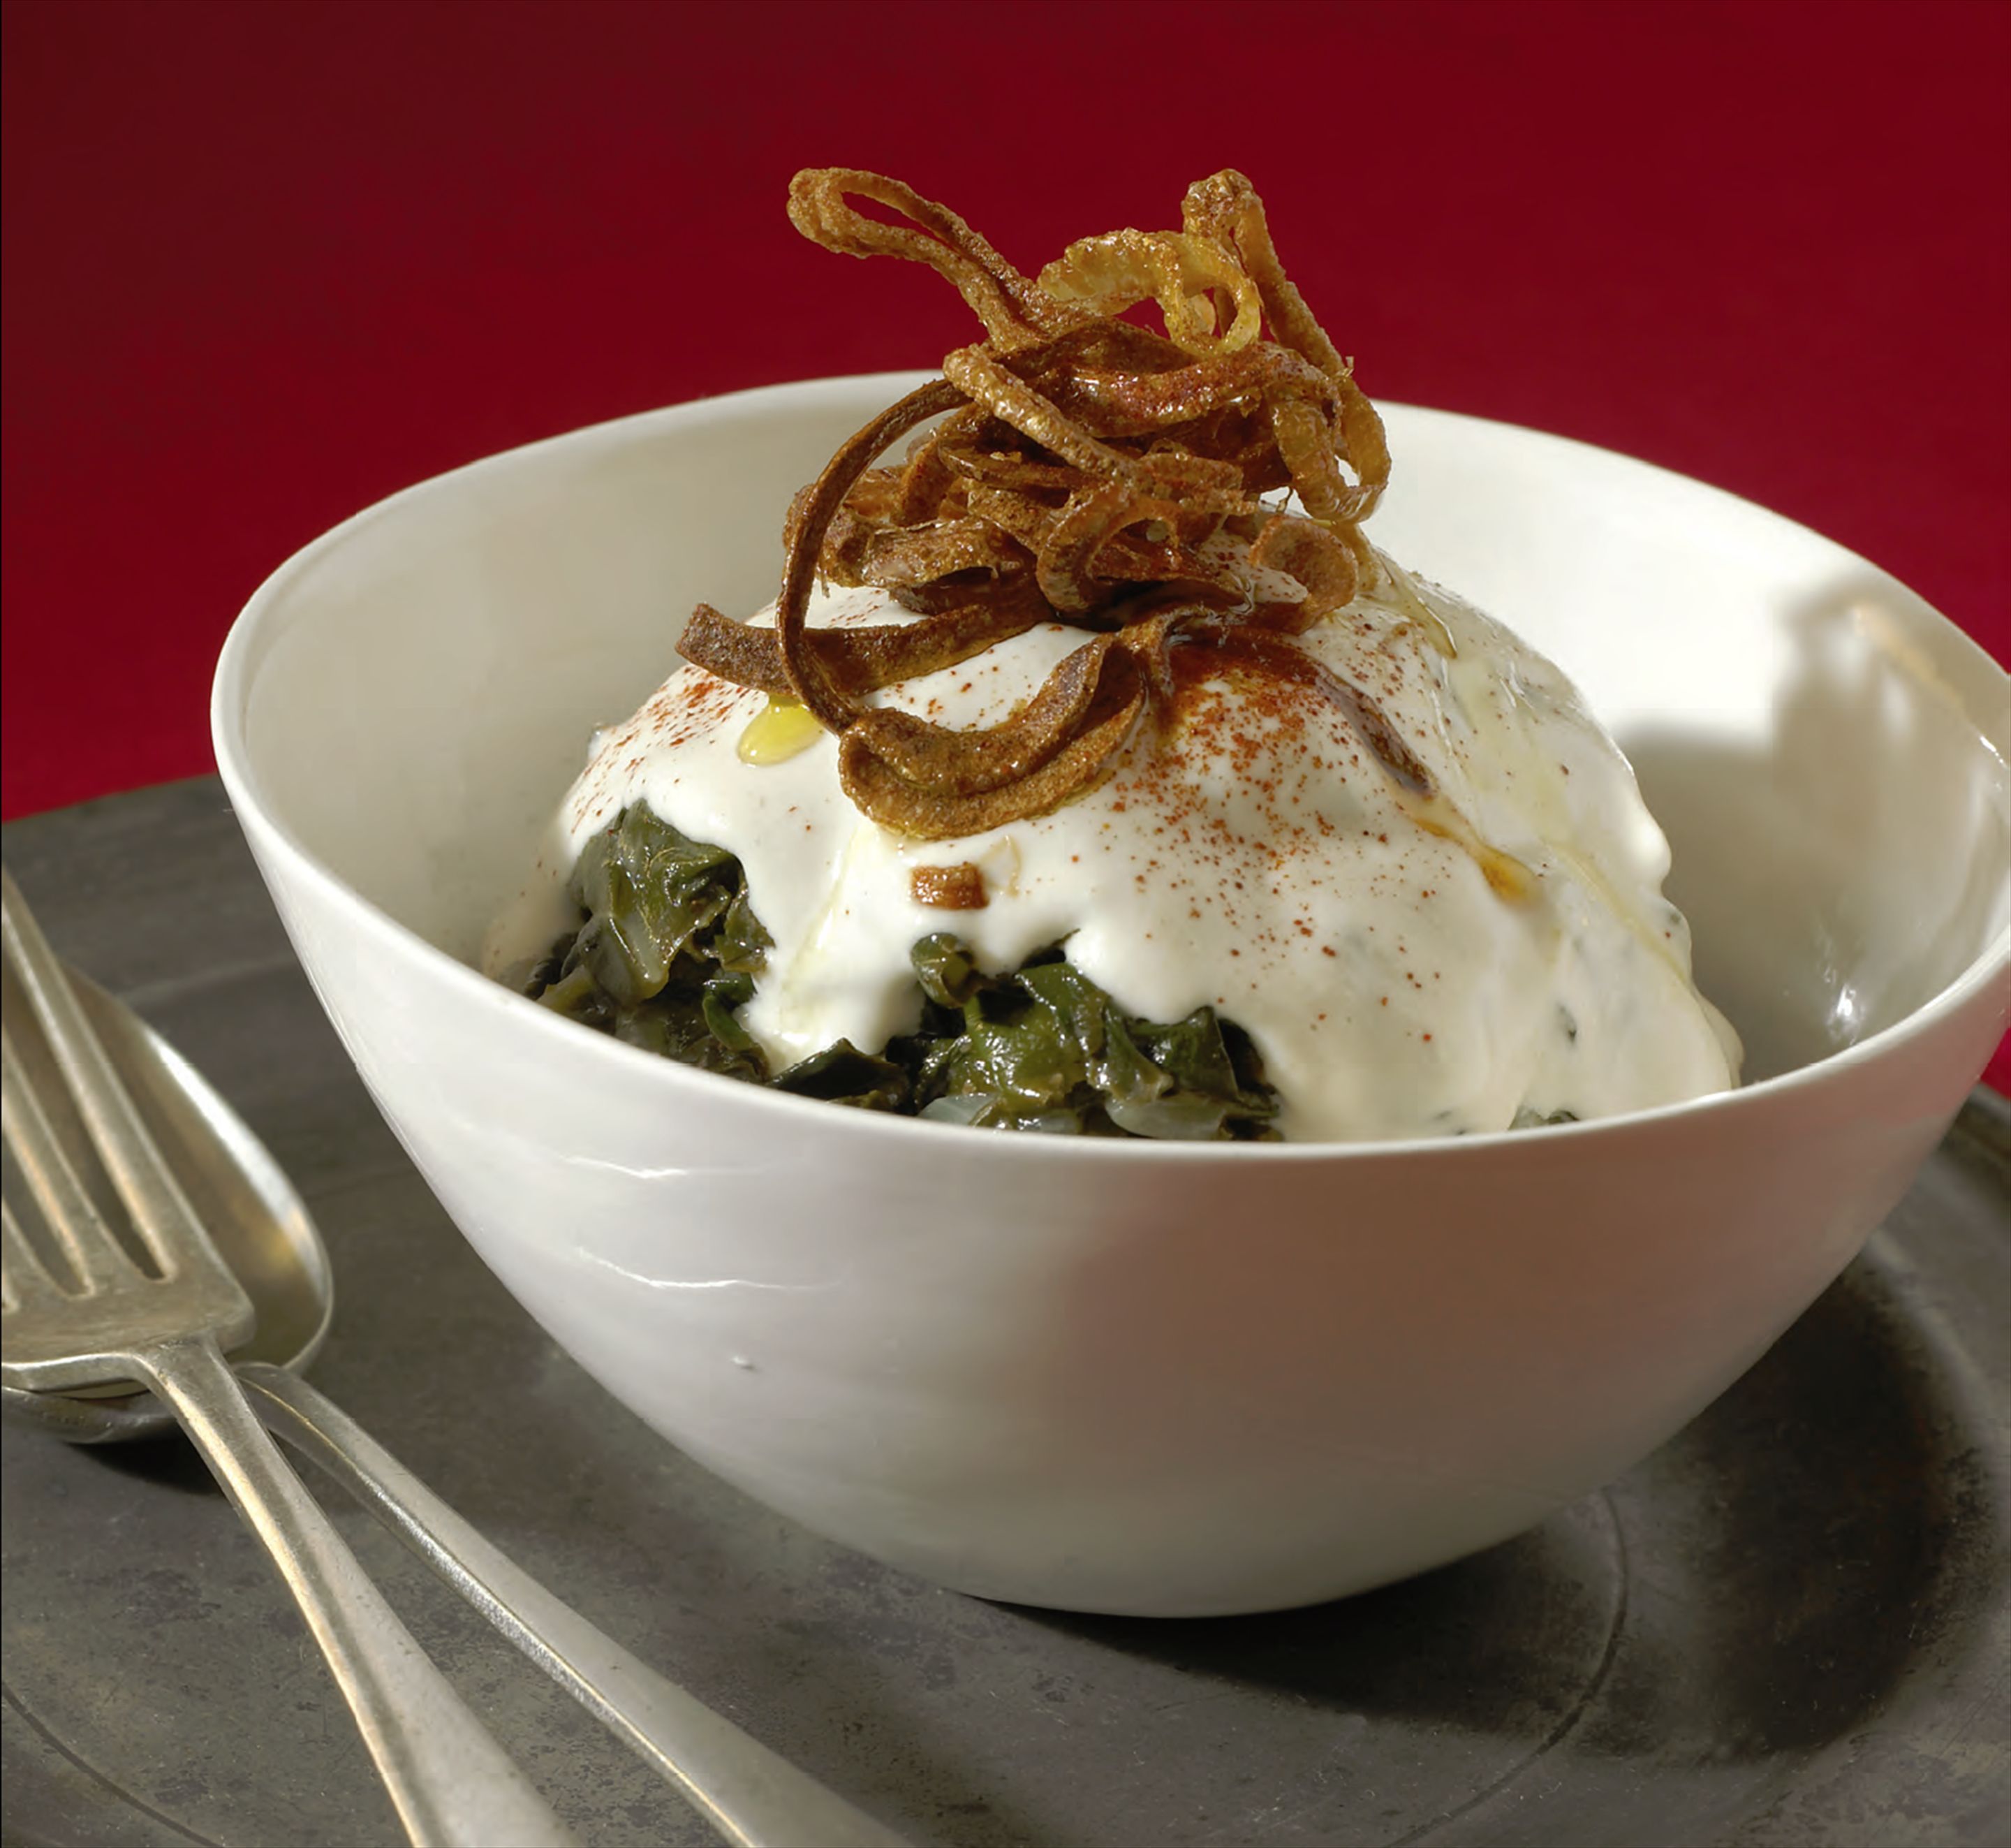 Braised silverbeet with crisp fried onions and tahini sauce